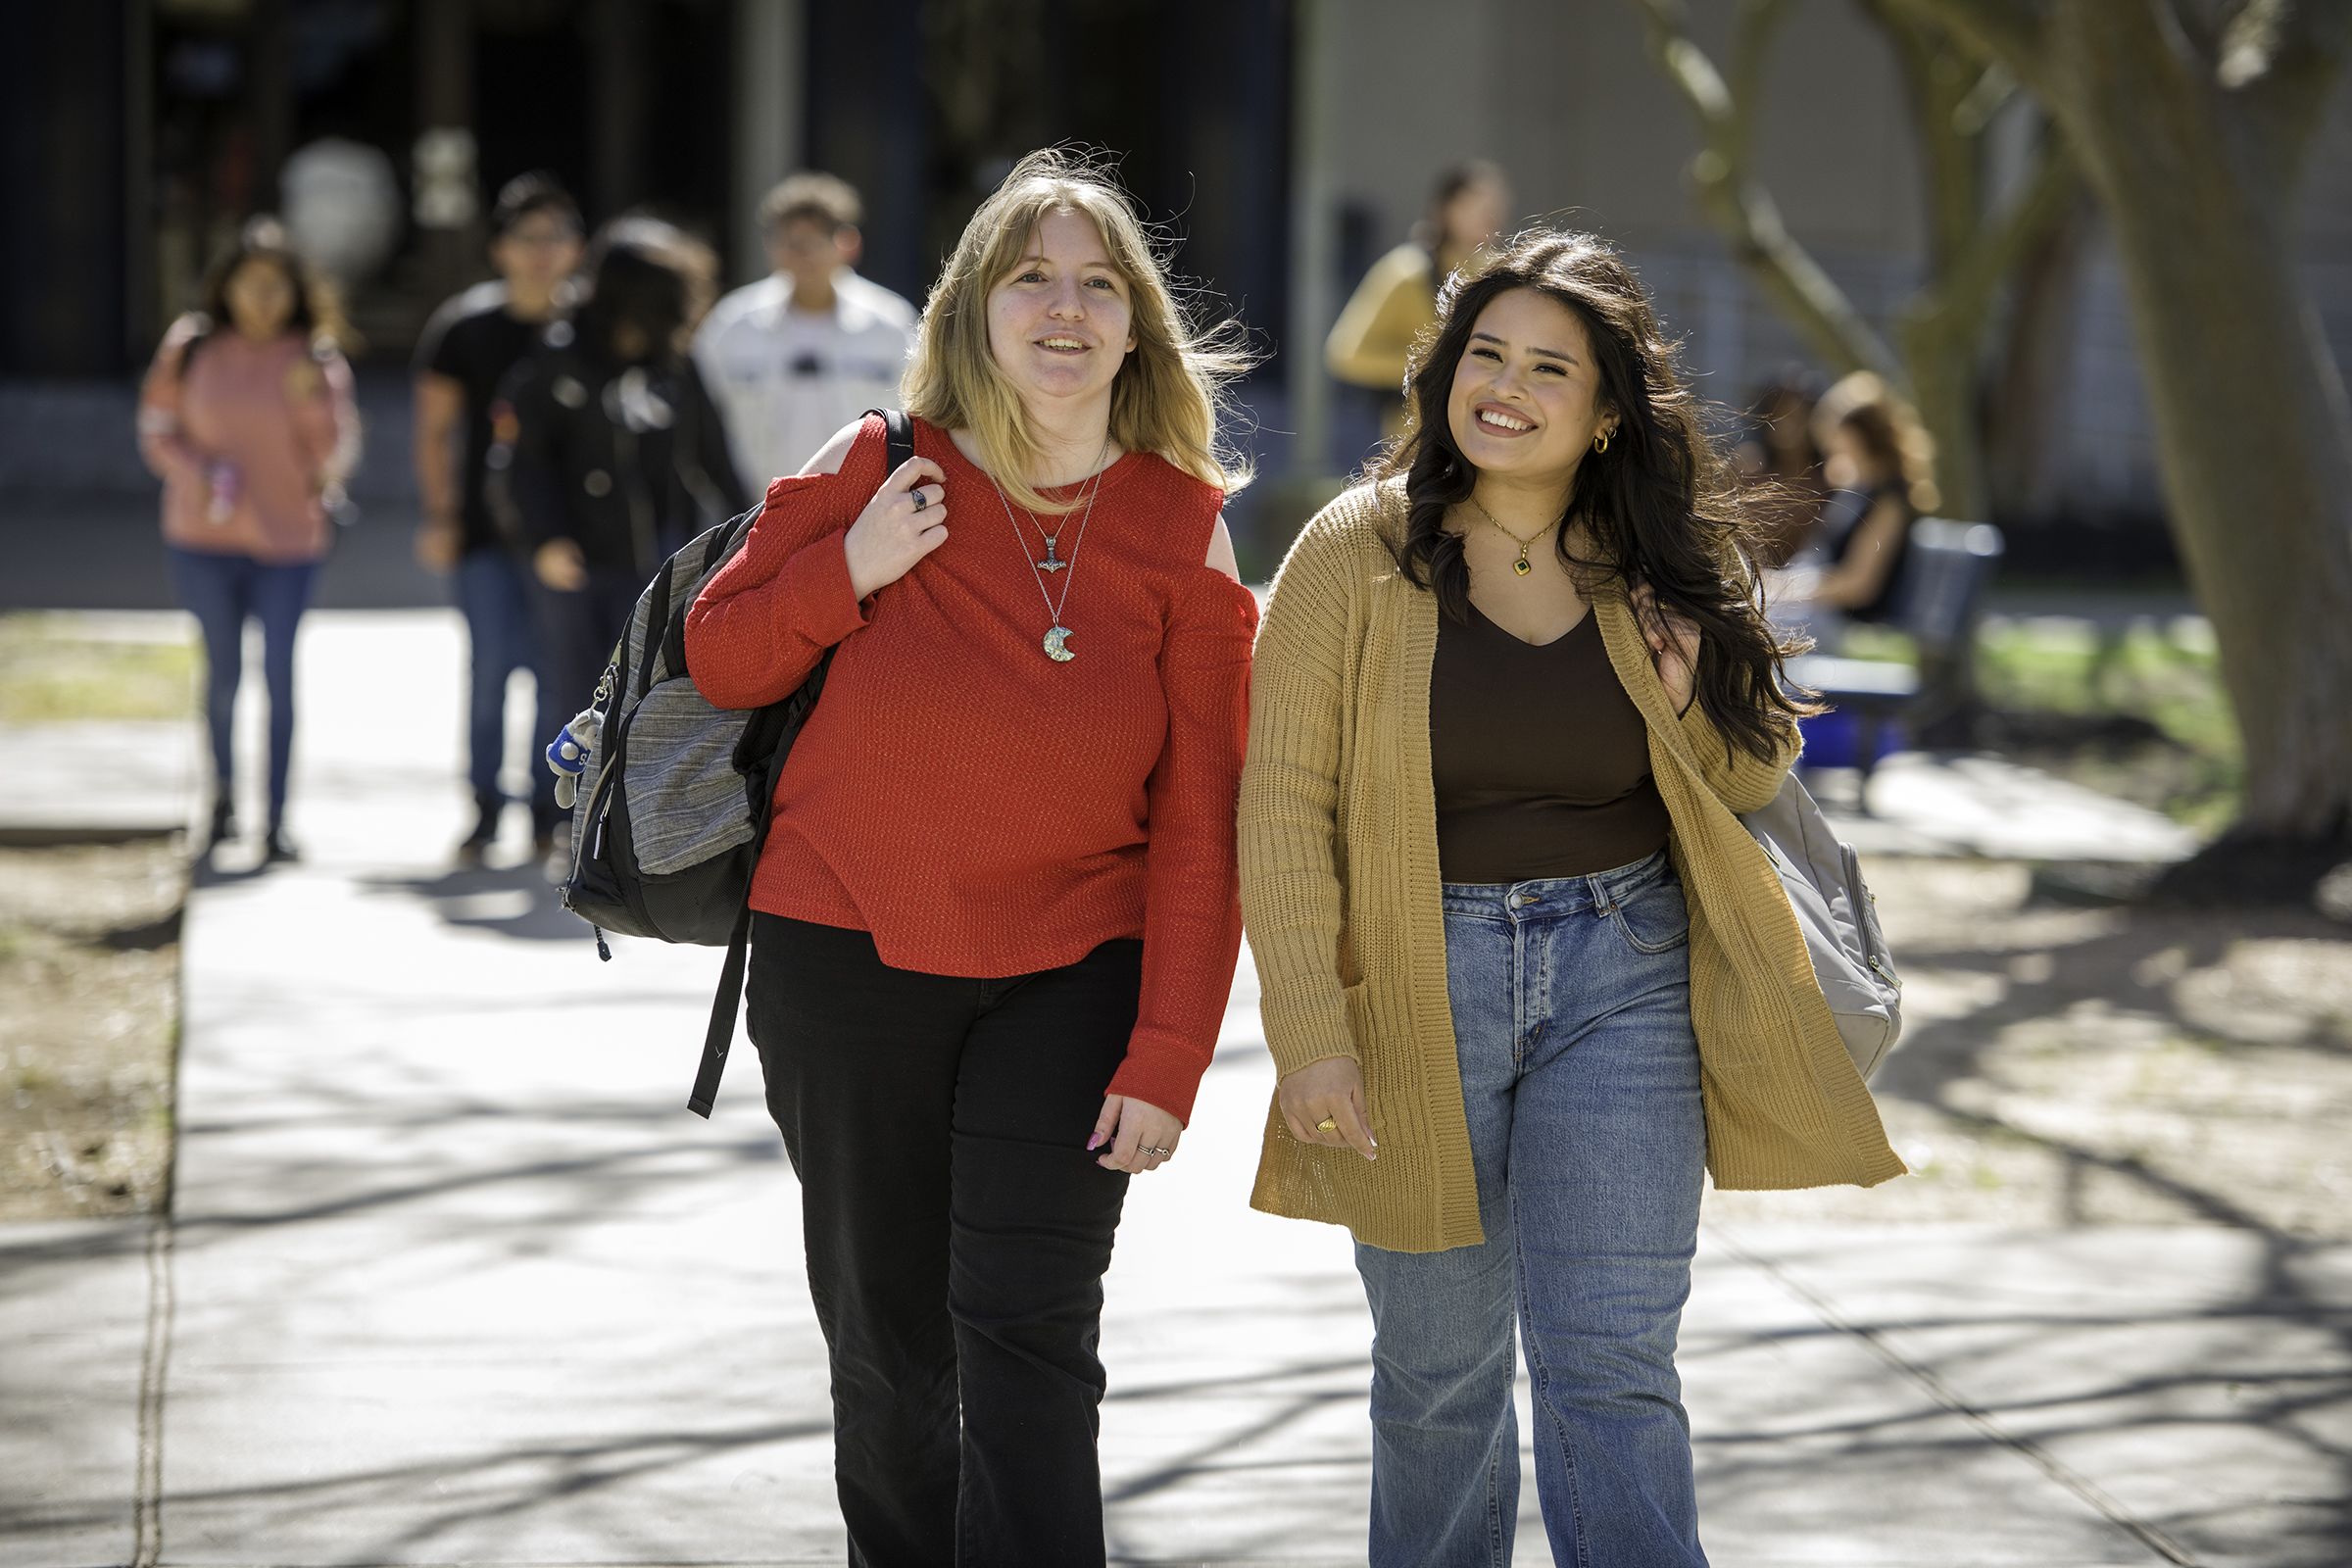 Two females walking on college campus